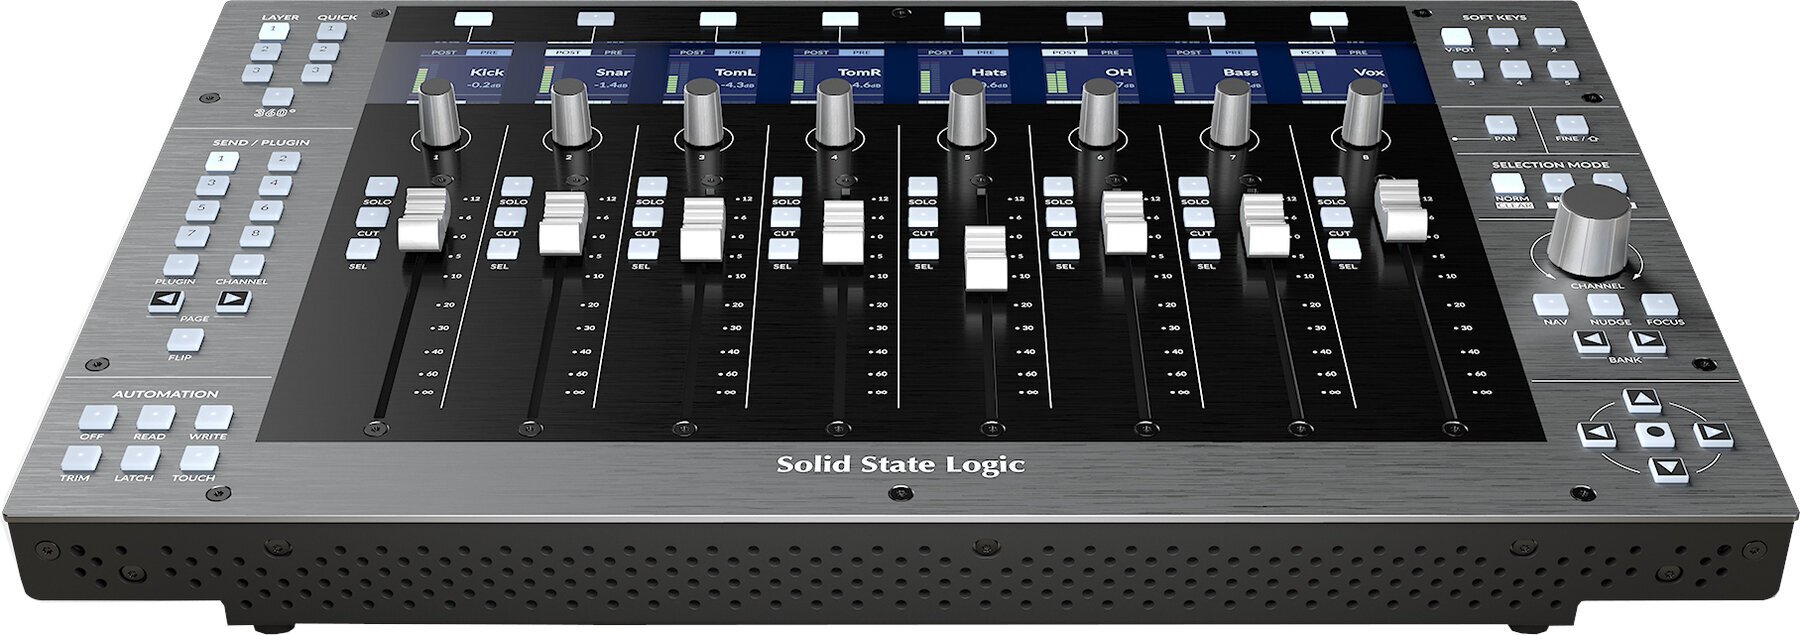 Solid State Logic UF8 Solid State Logic